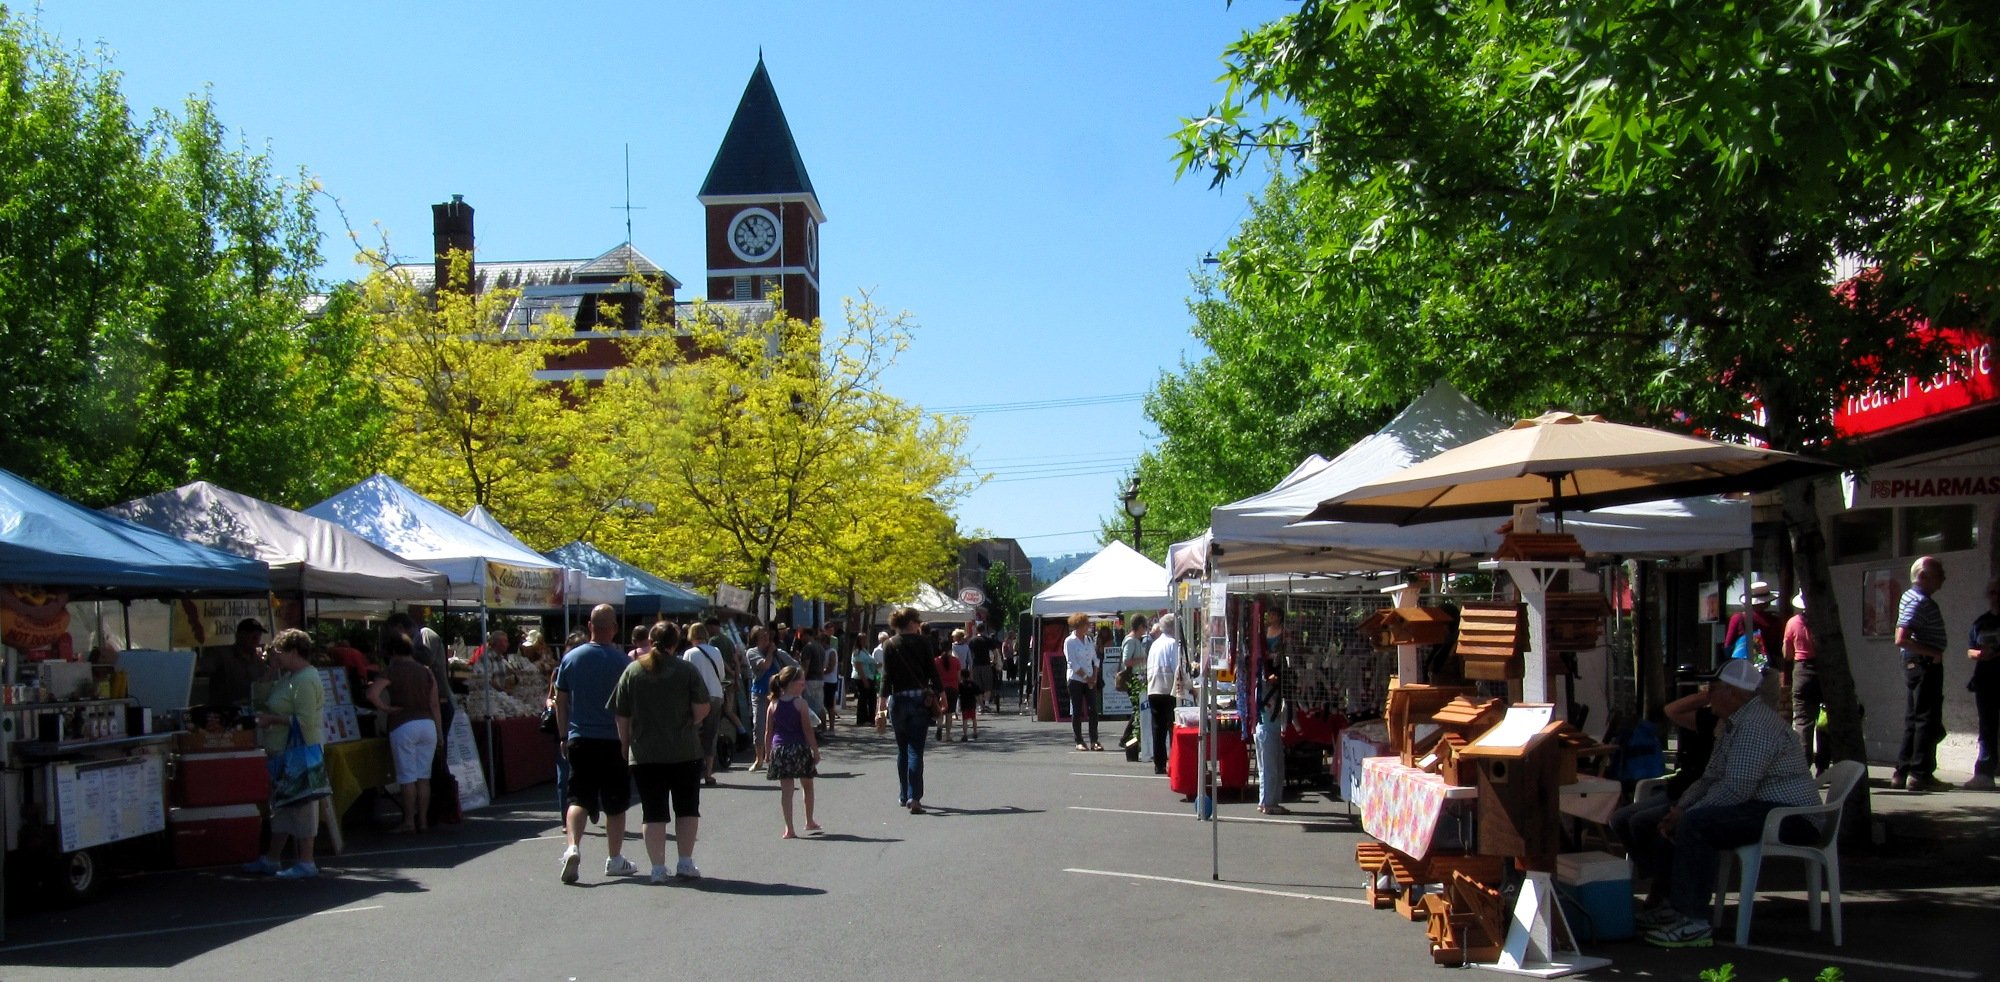 An outdoor market is set up on a sunny city street.